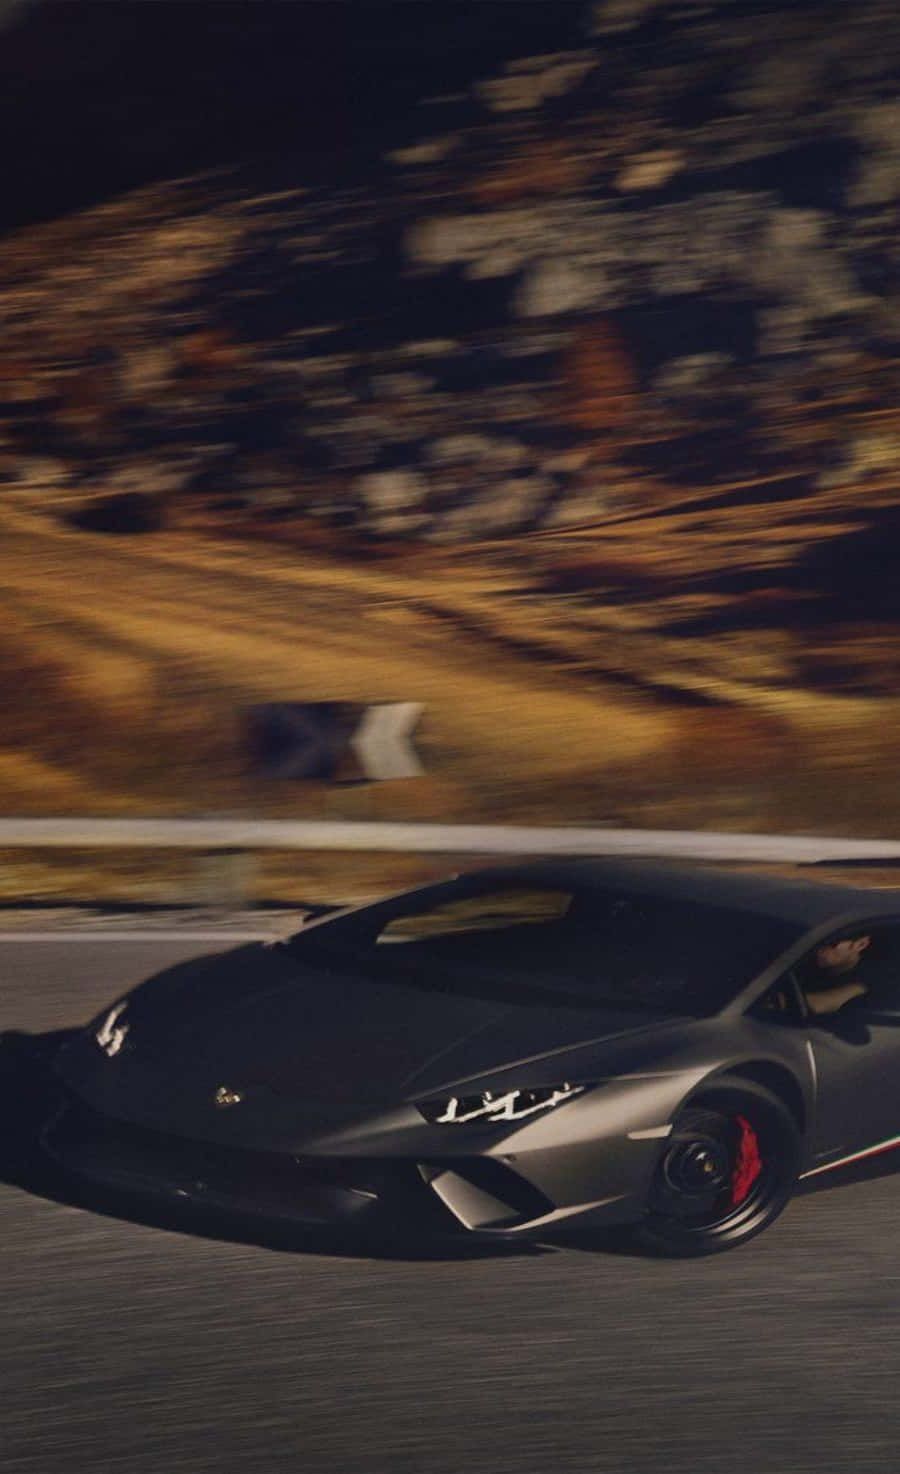 From streets to screens, this Black Lamborghini looks just as stunning on a smartphone. Wallpaper